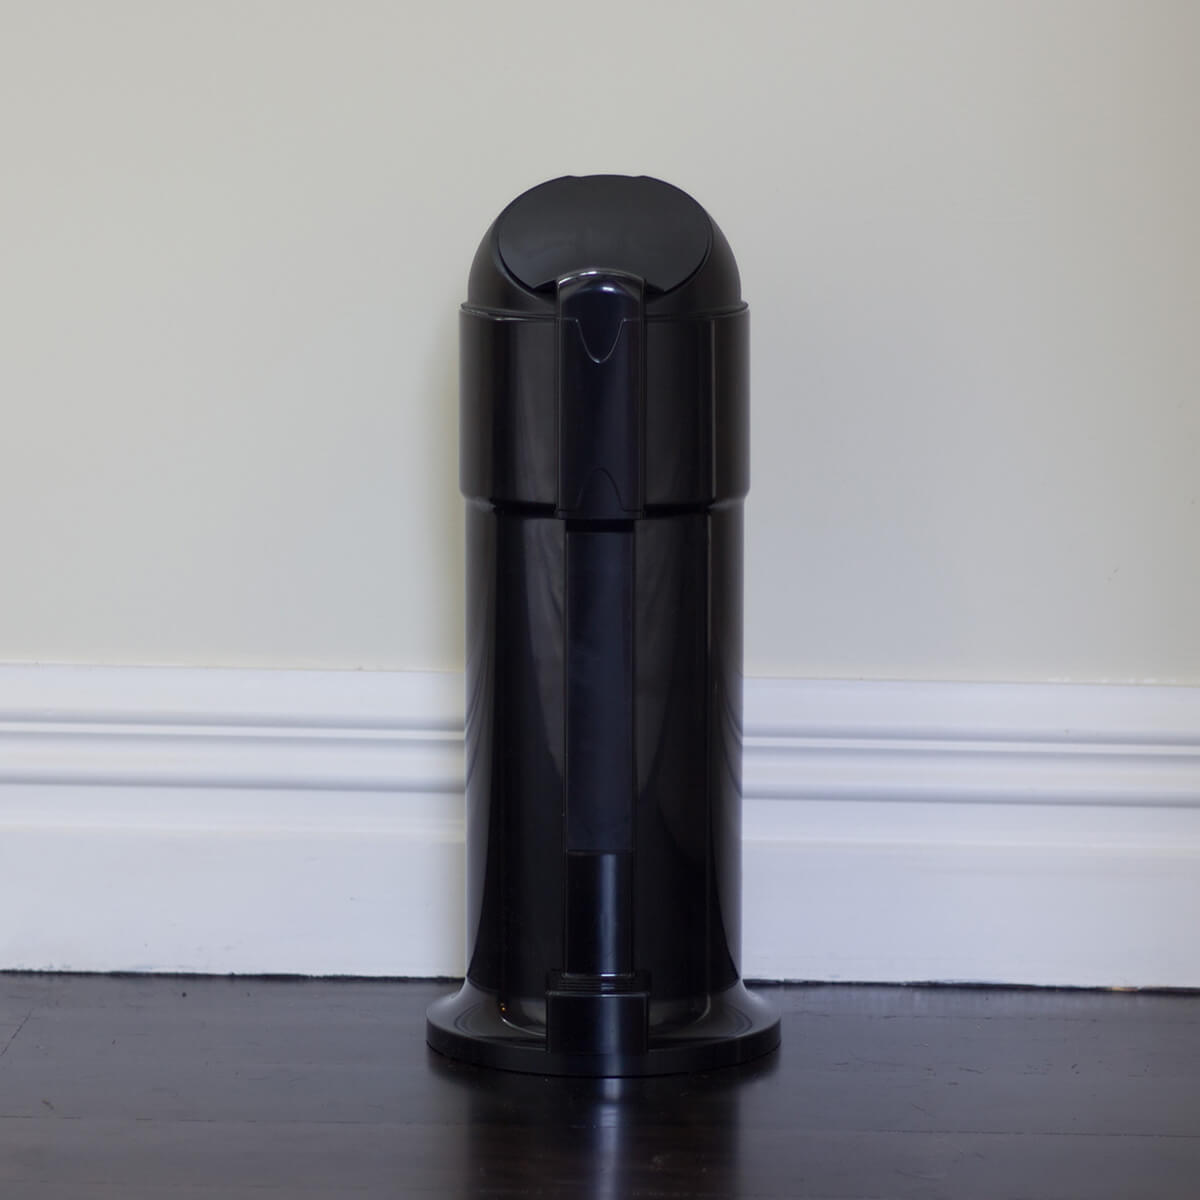 Black Sanitary Waste Disposal Unit with Foot-pedal (6.5 litres)